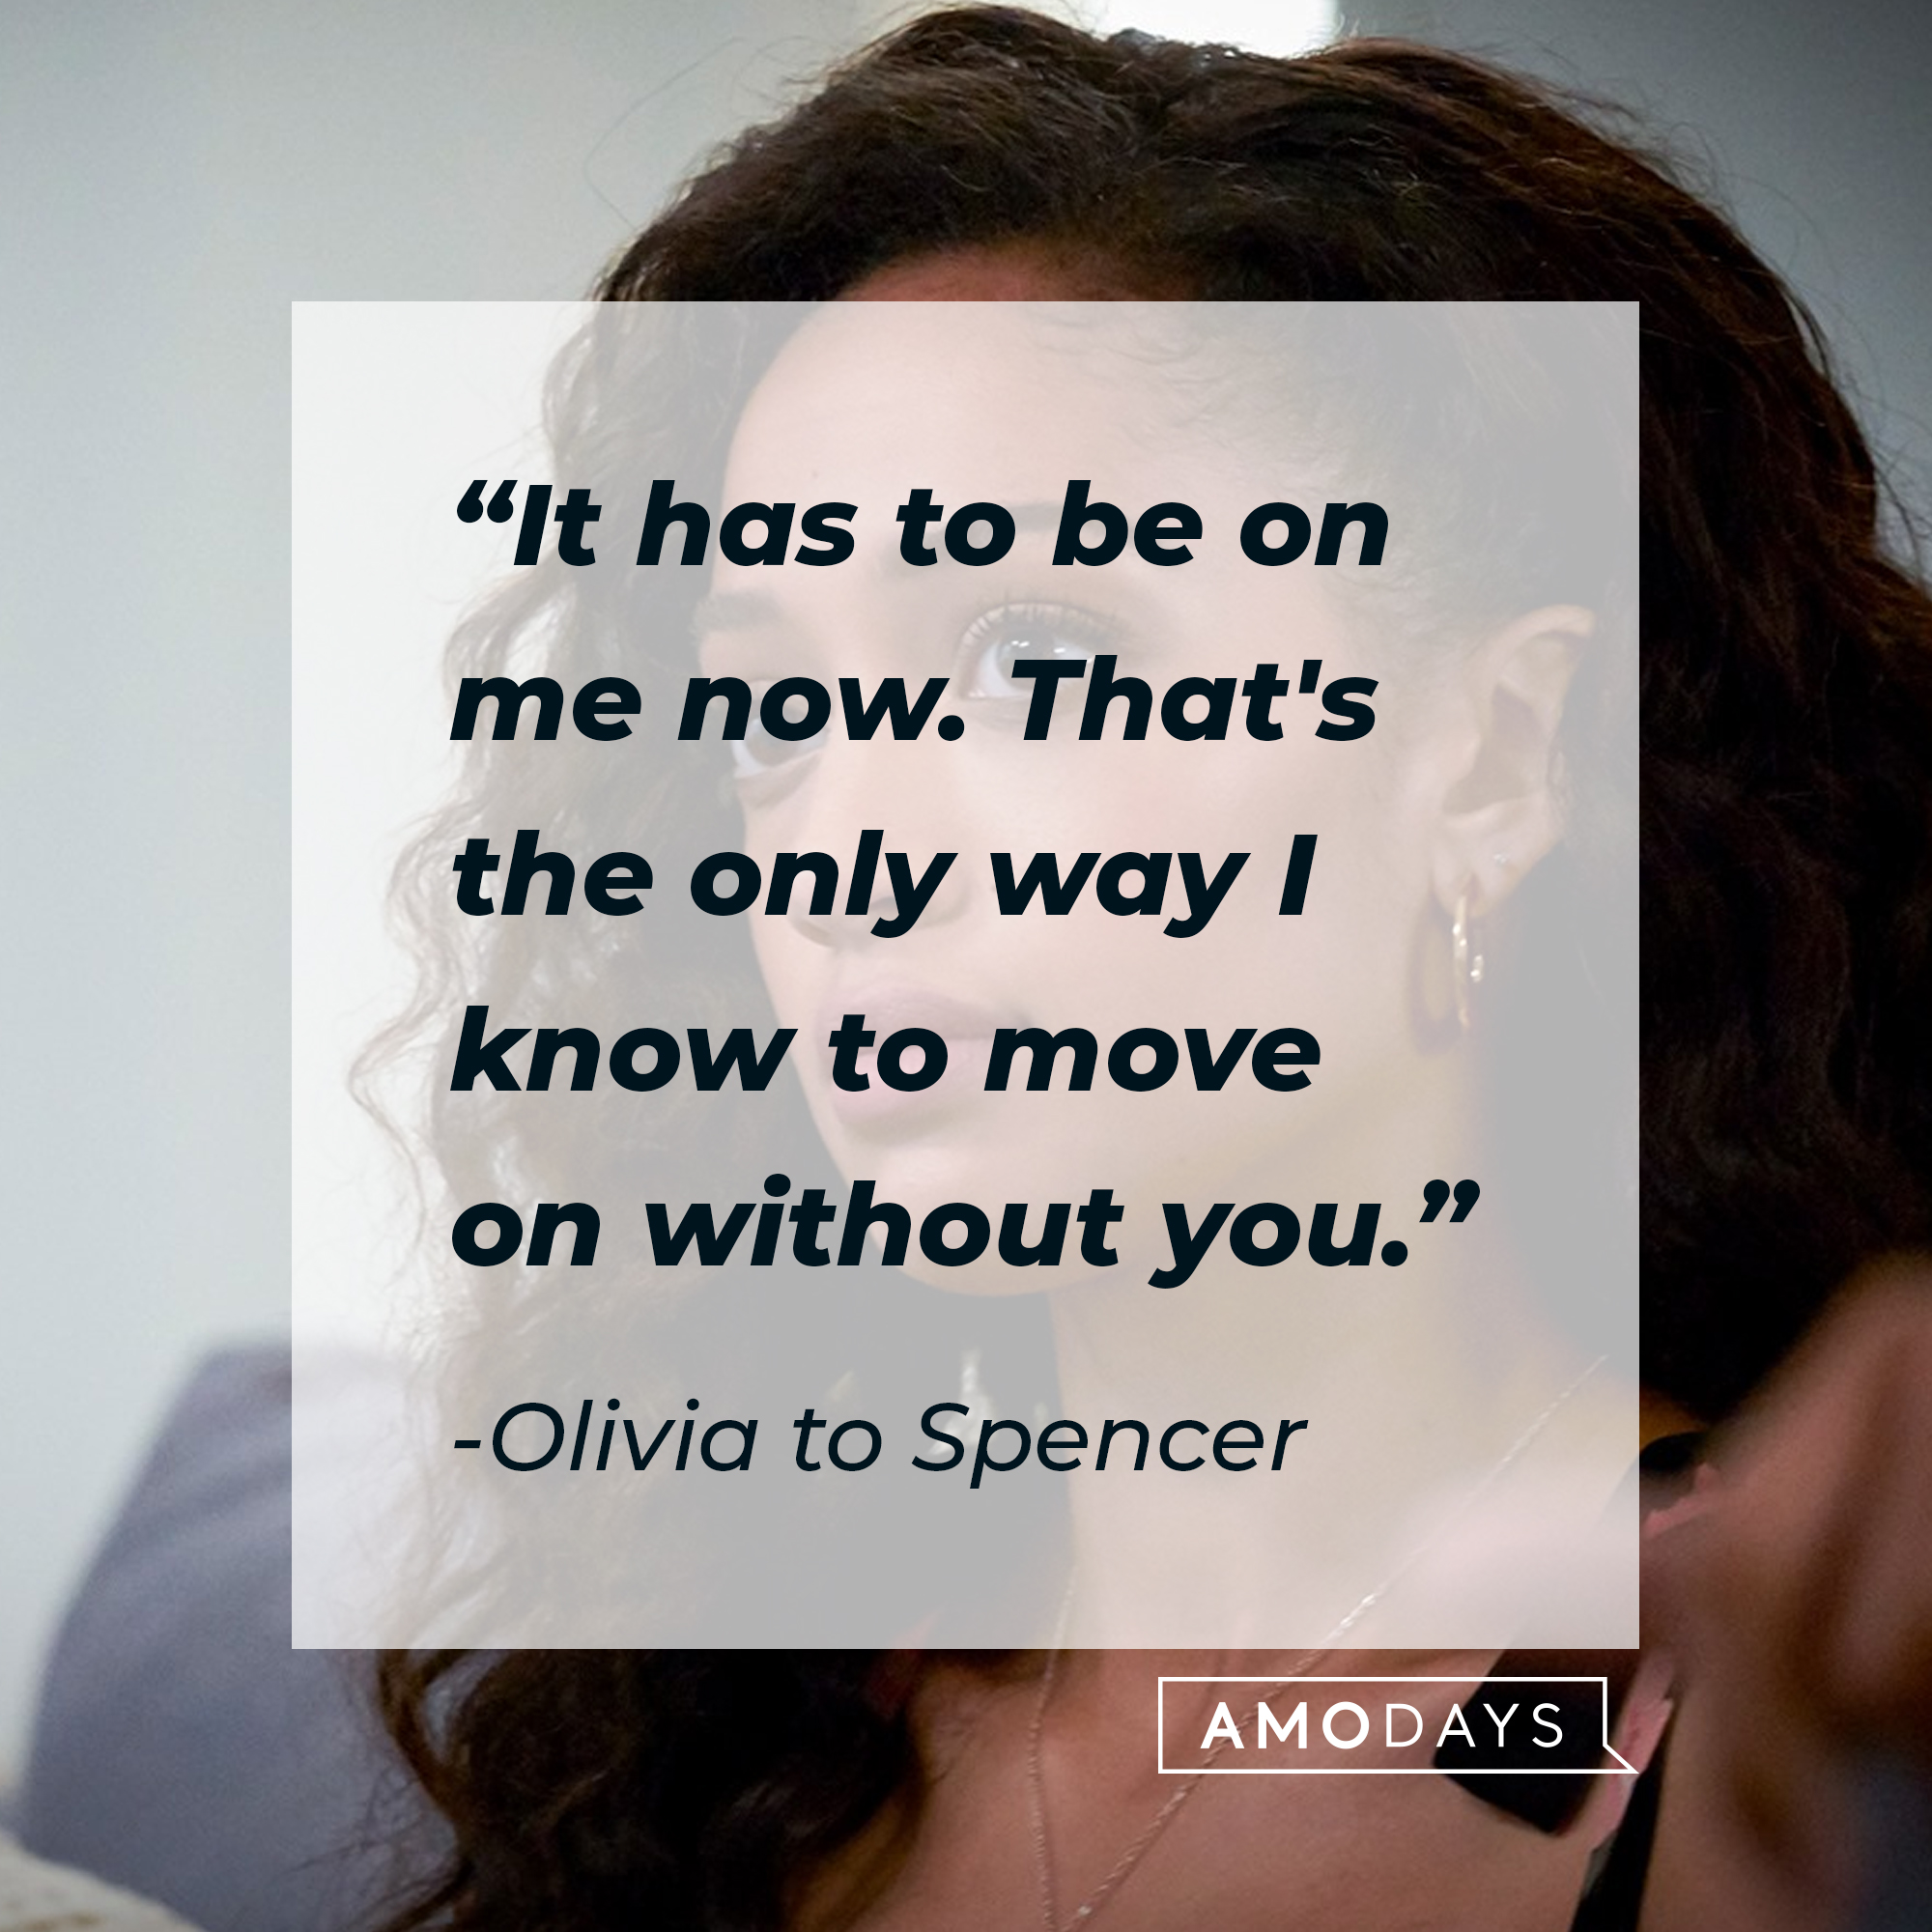 A quote from Olivia to Spencer: "It has to be on me now. That's the only way I know to move on without you." | Source: facebook.com/CWAllAmerican